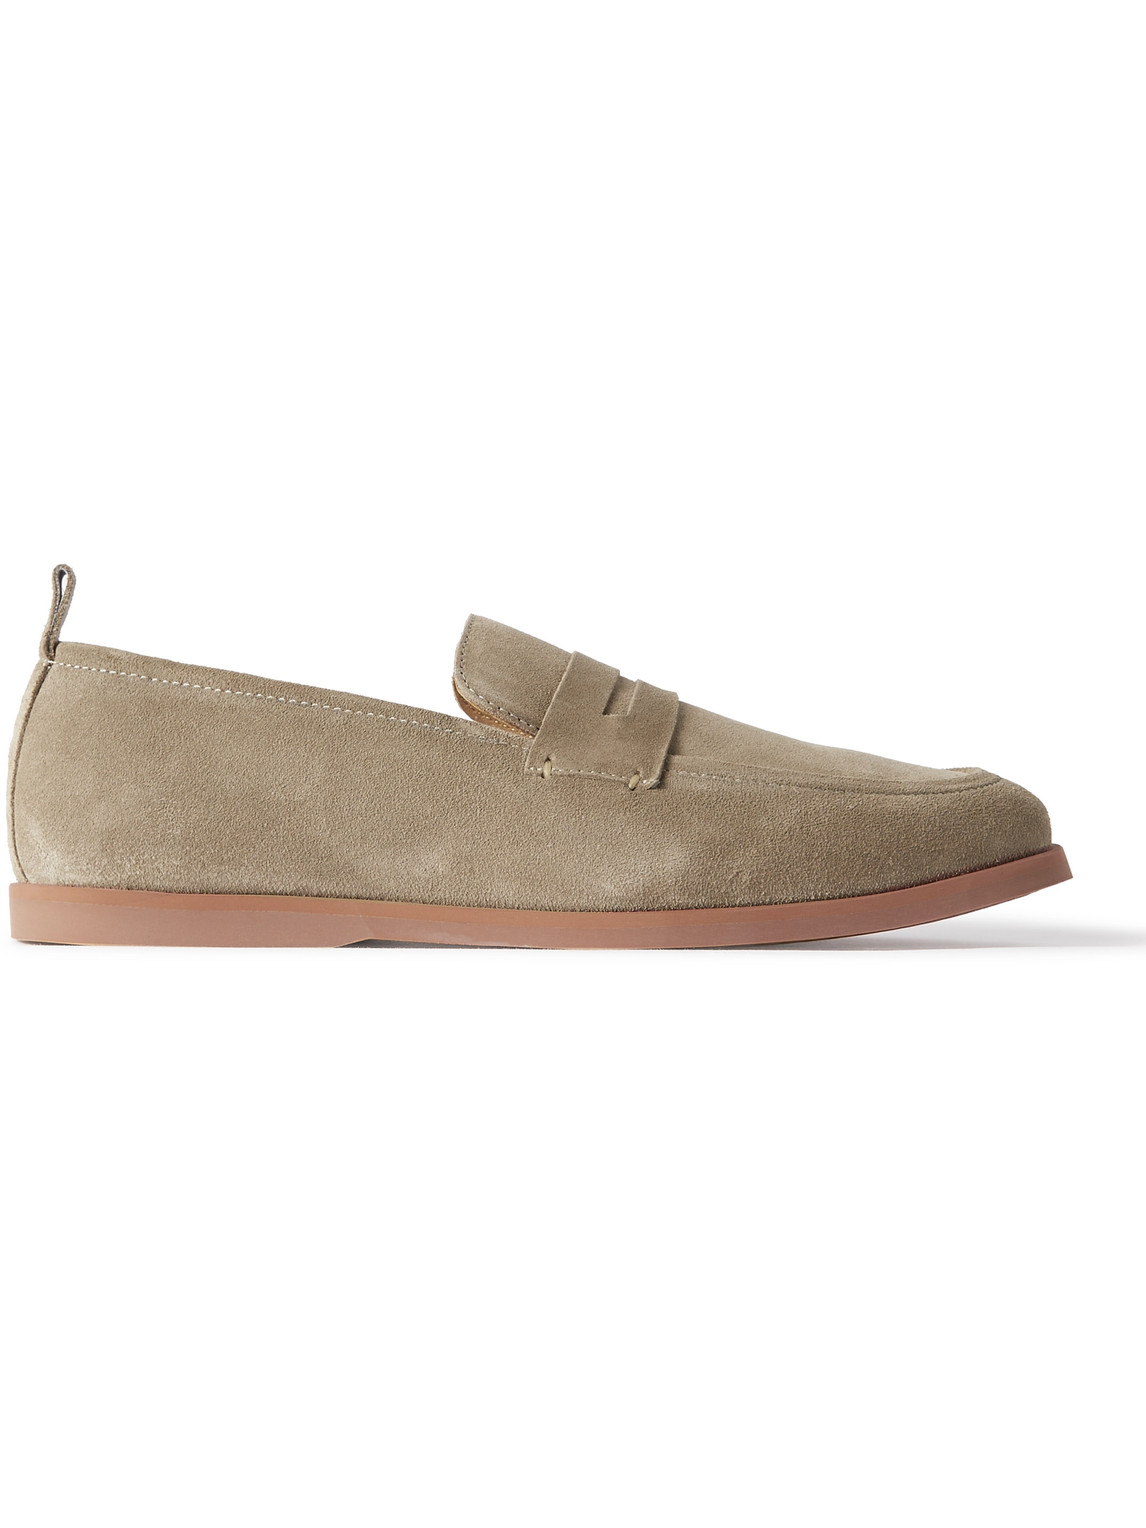 Leo Suede Penny Loafers